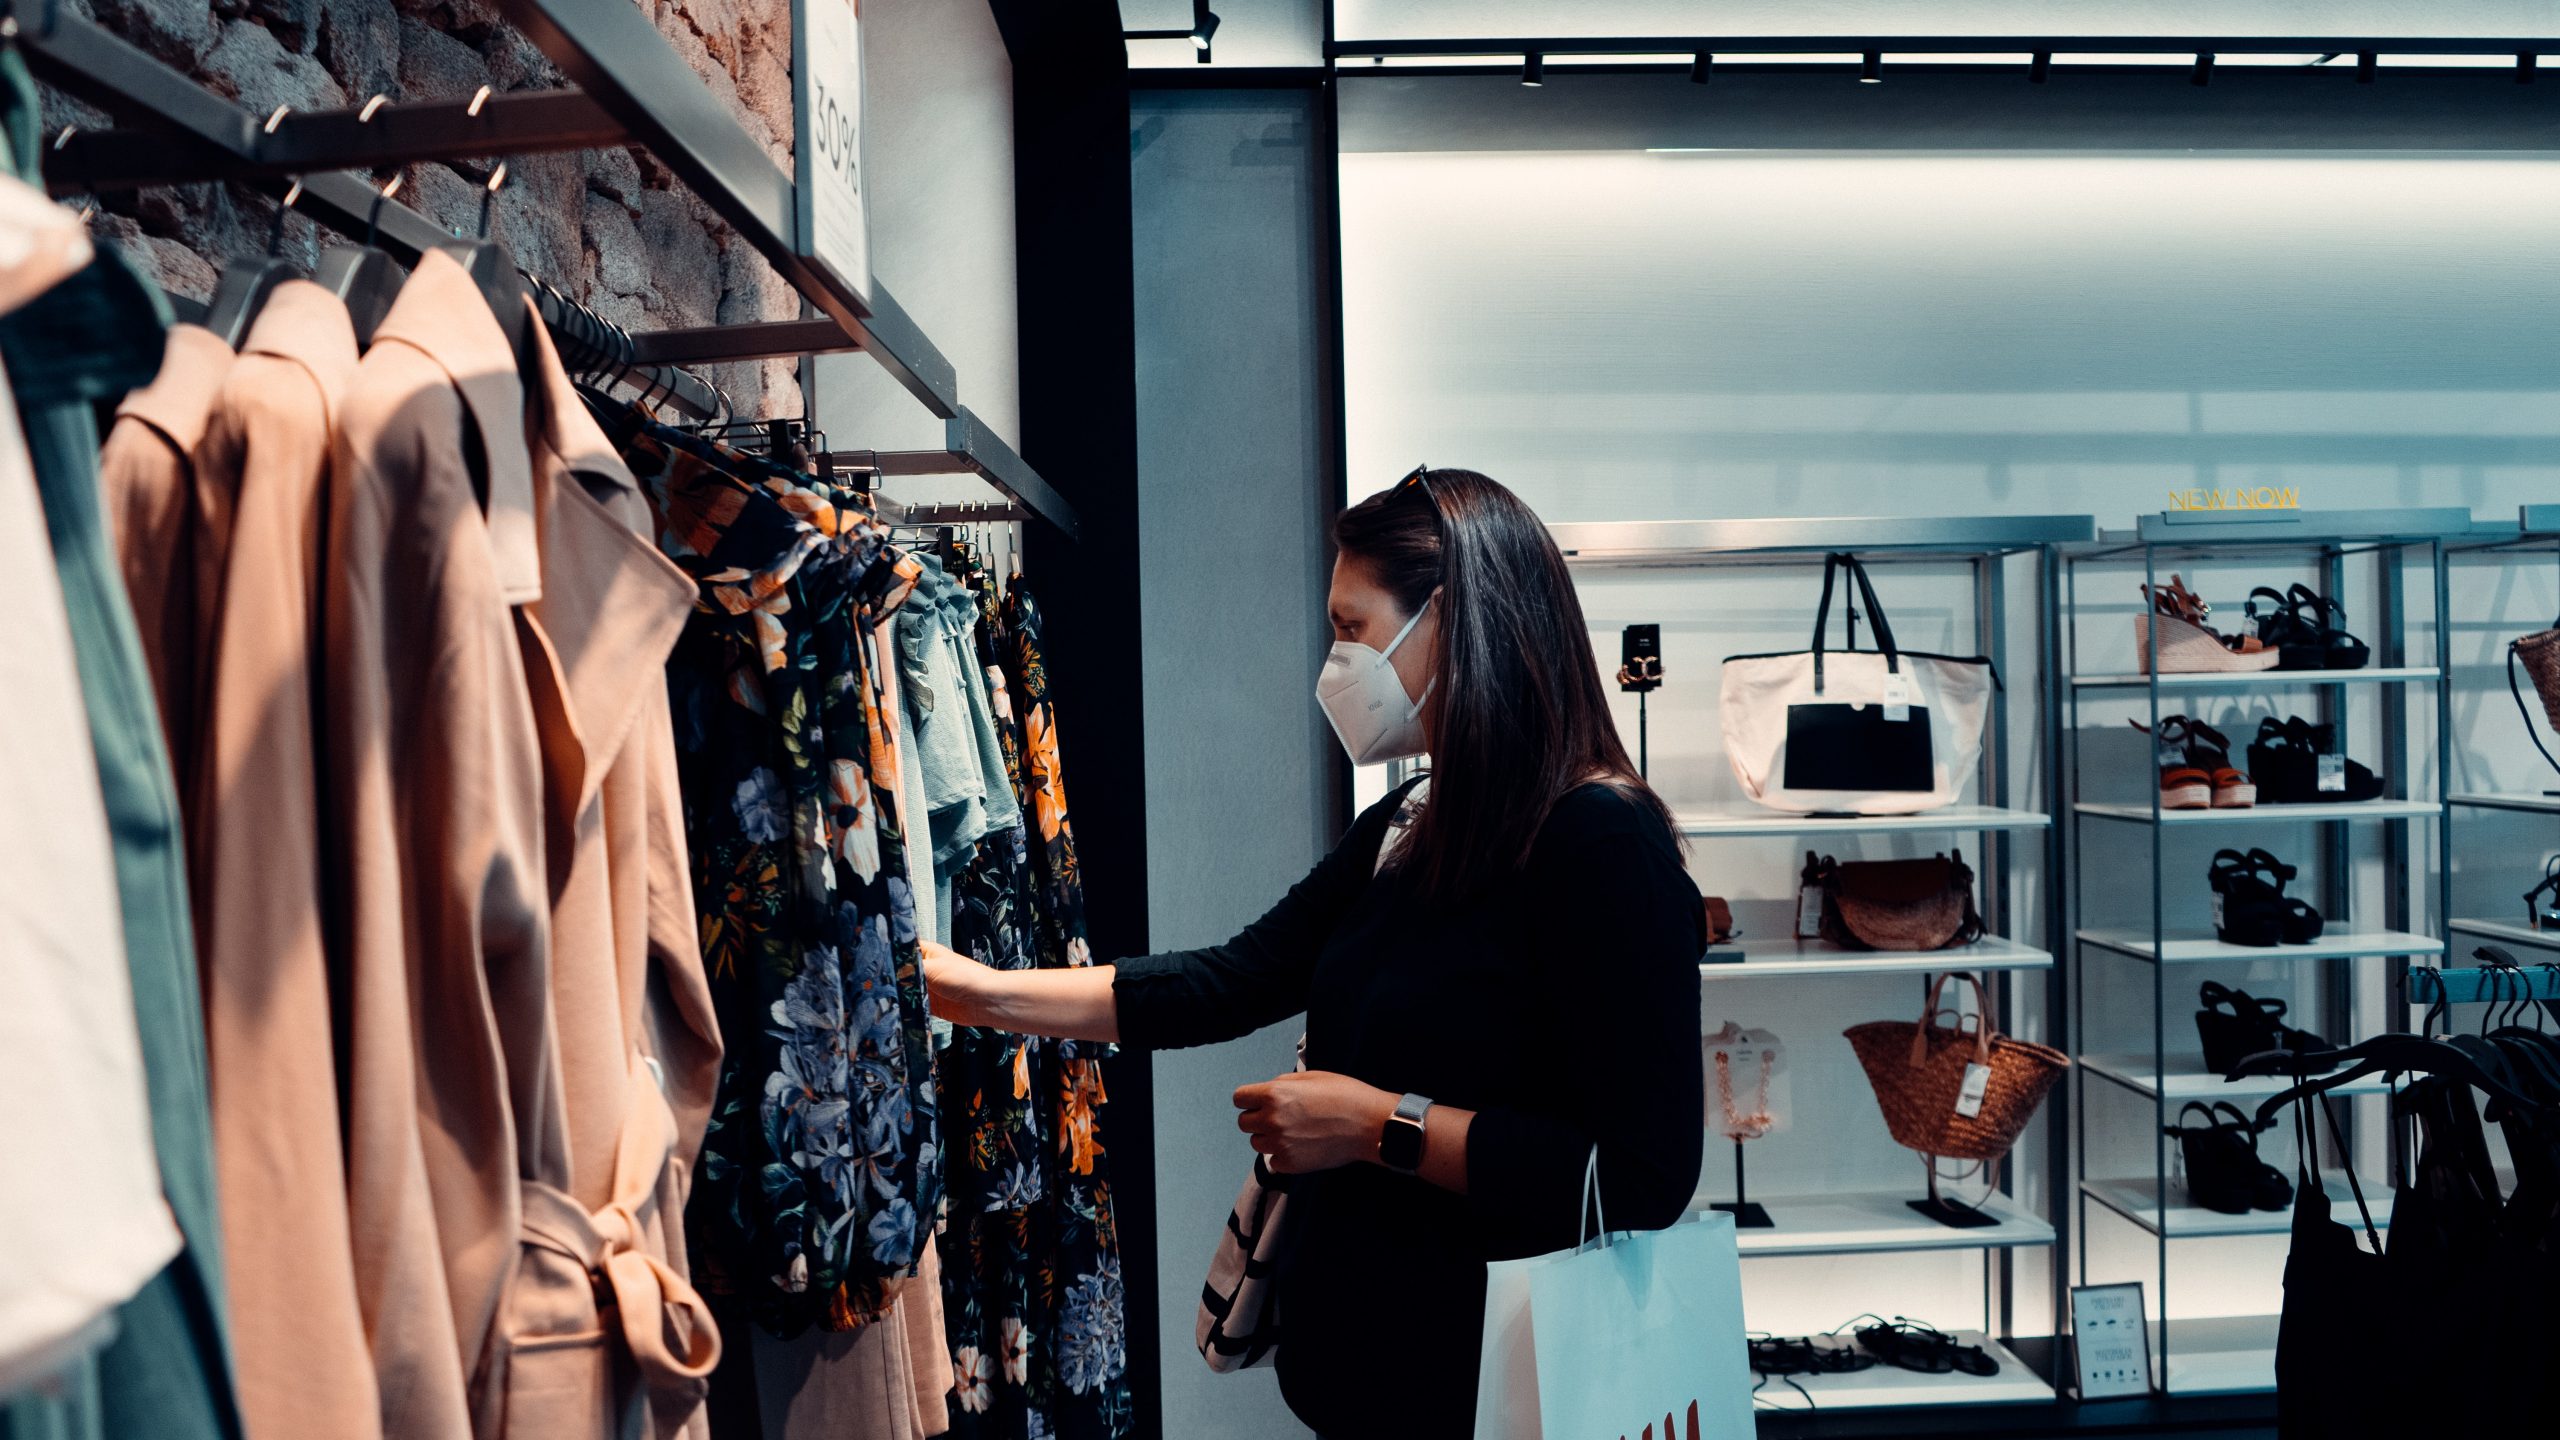 A woman shopping with a face mask on. Arturo Rey/Unsplash